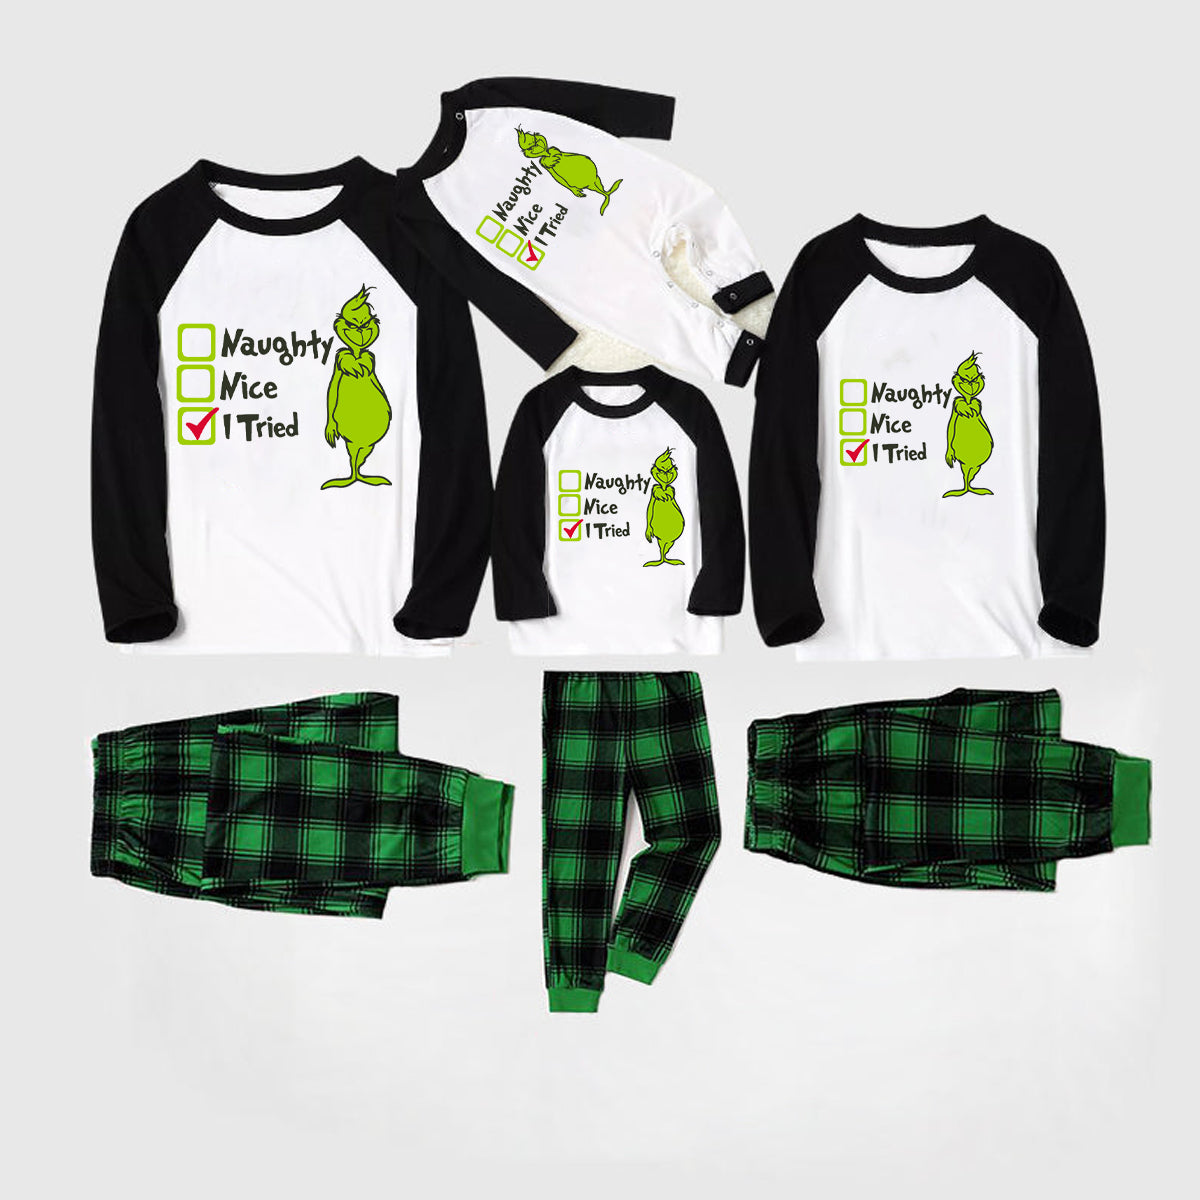 Christmas "Naughty&Nice& I Tried" Letter Print Patterned Casual Long Sleeve Sweatshirts Black Contrast Top and Black and Green Plaid Pants Family Matching Pajamas Sets With Pet Bandana